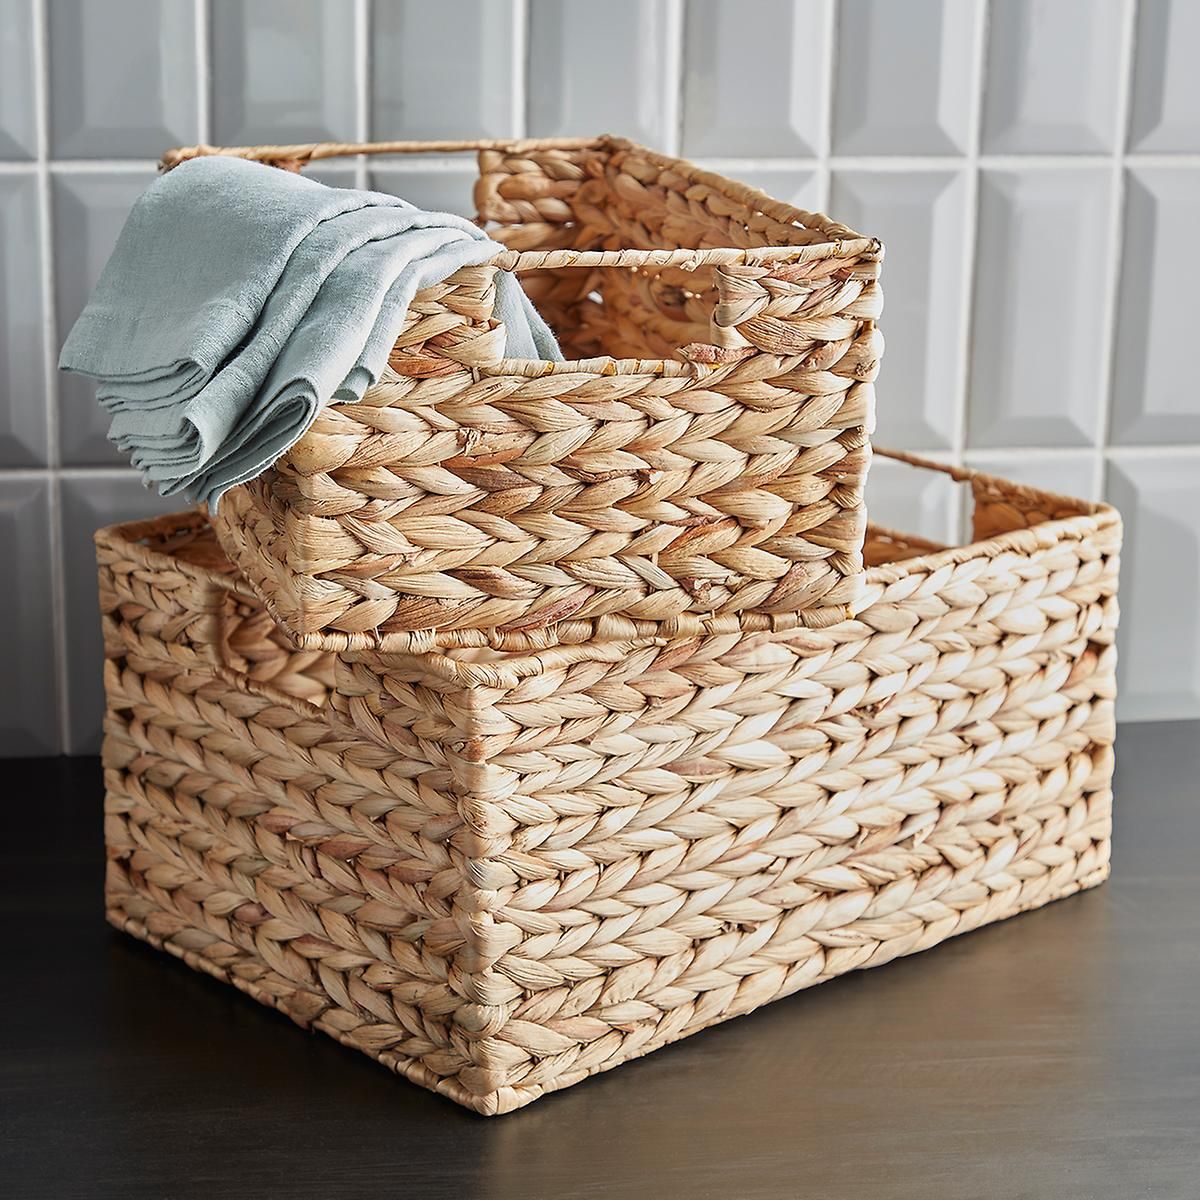 Cases of Water Hyacinth Storage Bins with Handles | The Container Store